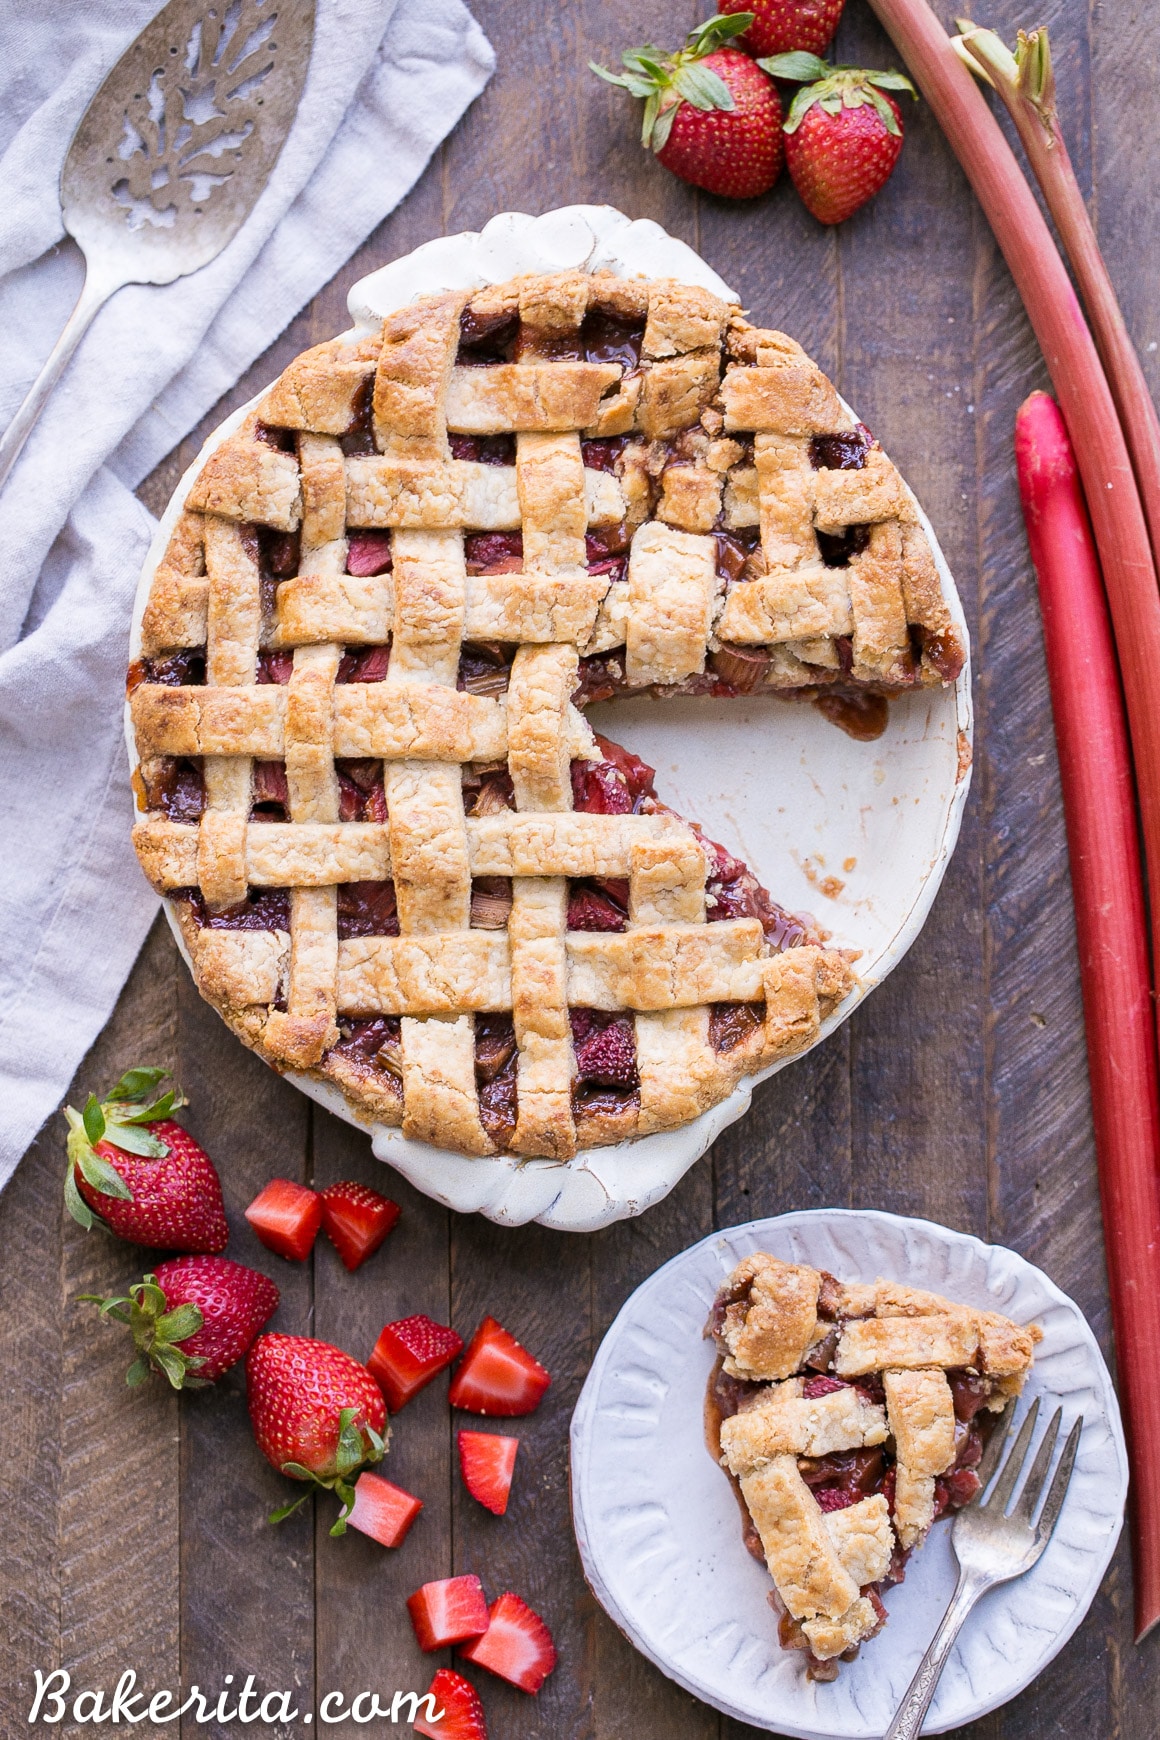 This Paleo Strawberry Rhubarb Pie is bursting with fresh strawberries and rhubarb, creating a delectable tart + sweet pie! The crisp and flaky gluten-free + grain-free crust is the perfect vessel for the lightly spiced fruit filling.